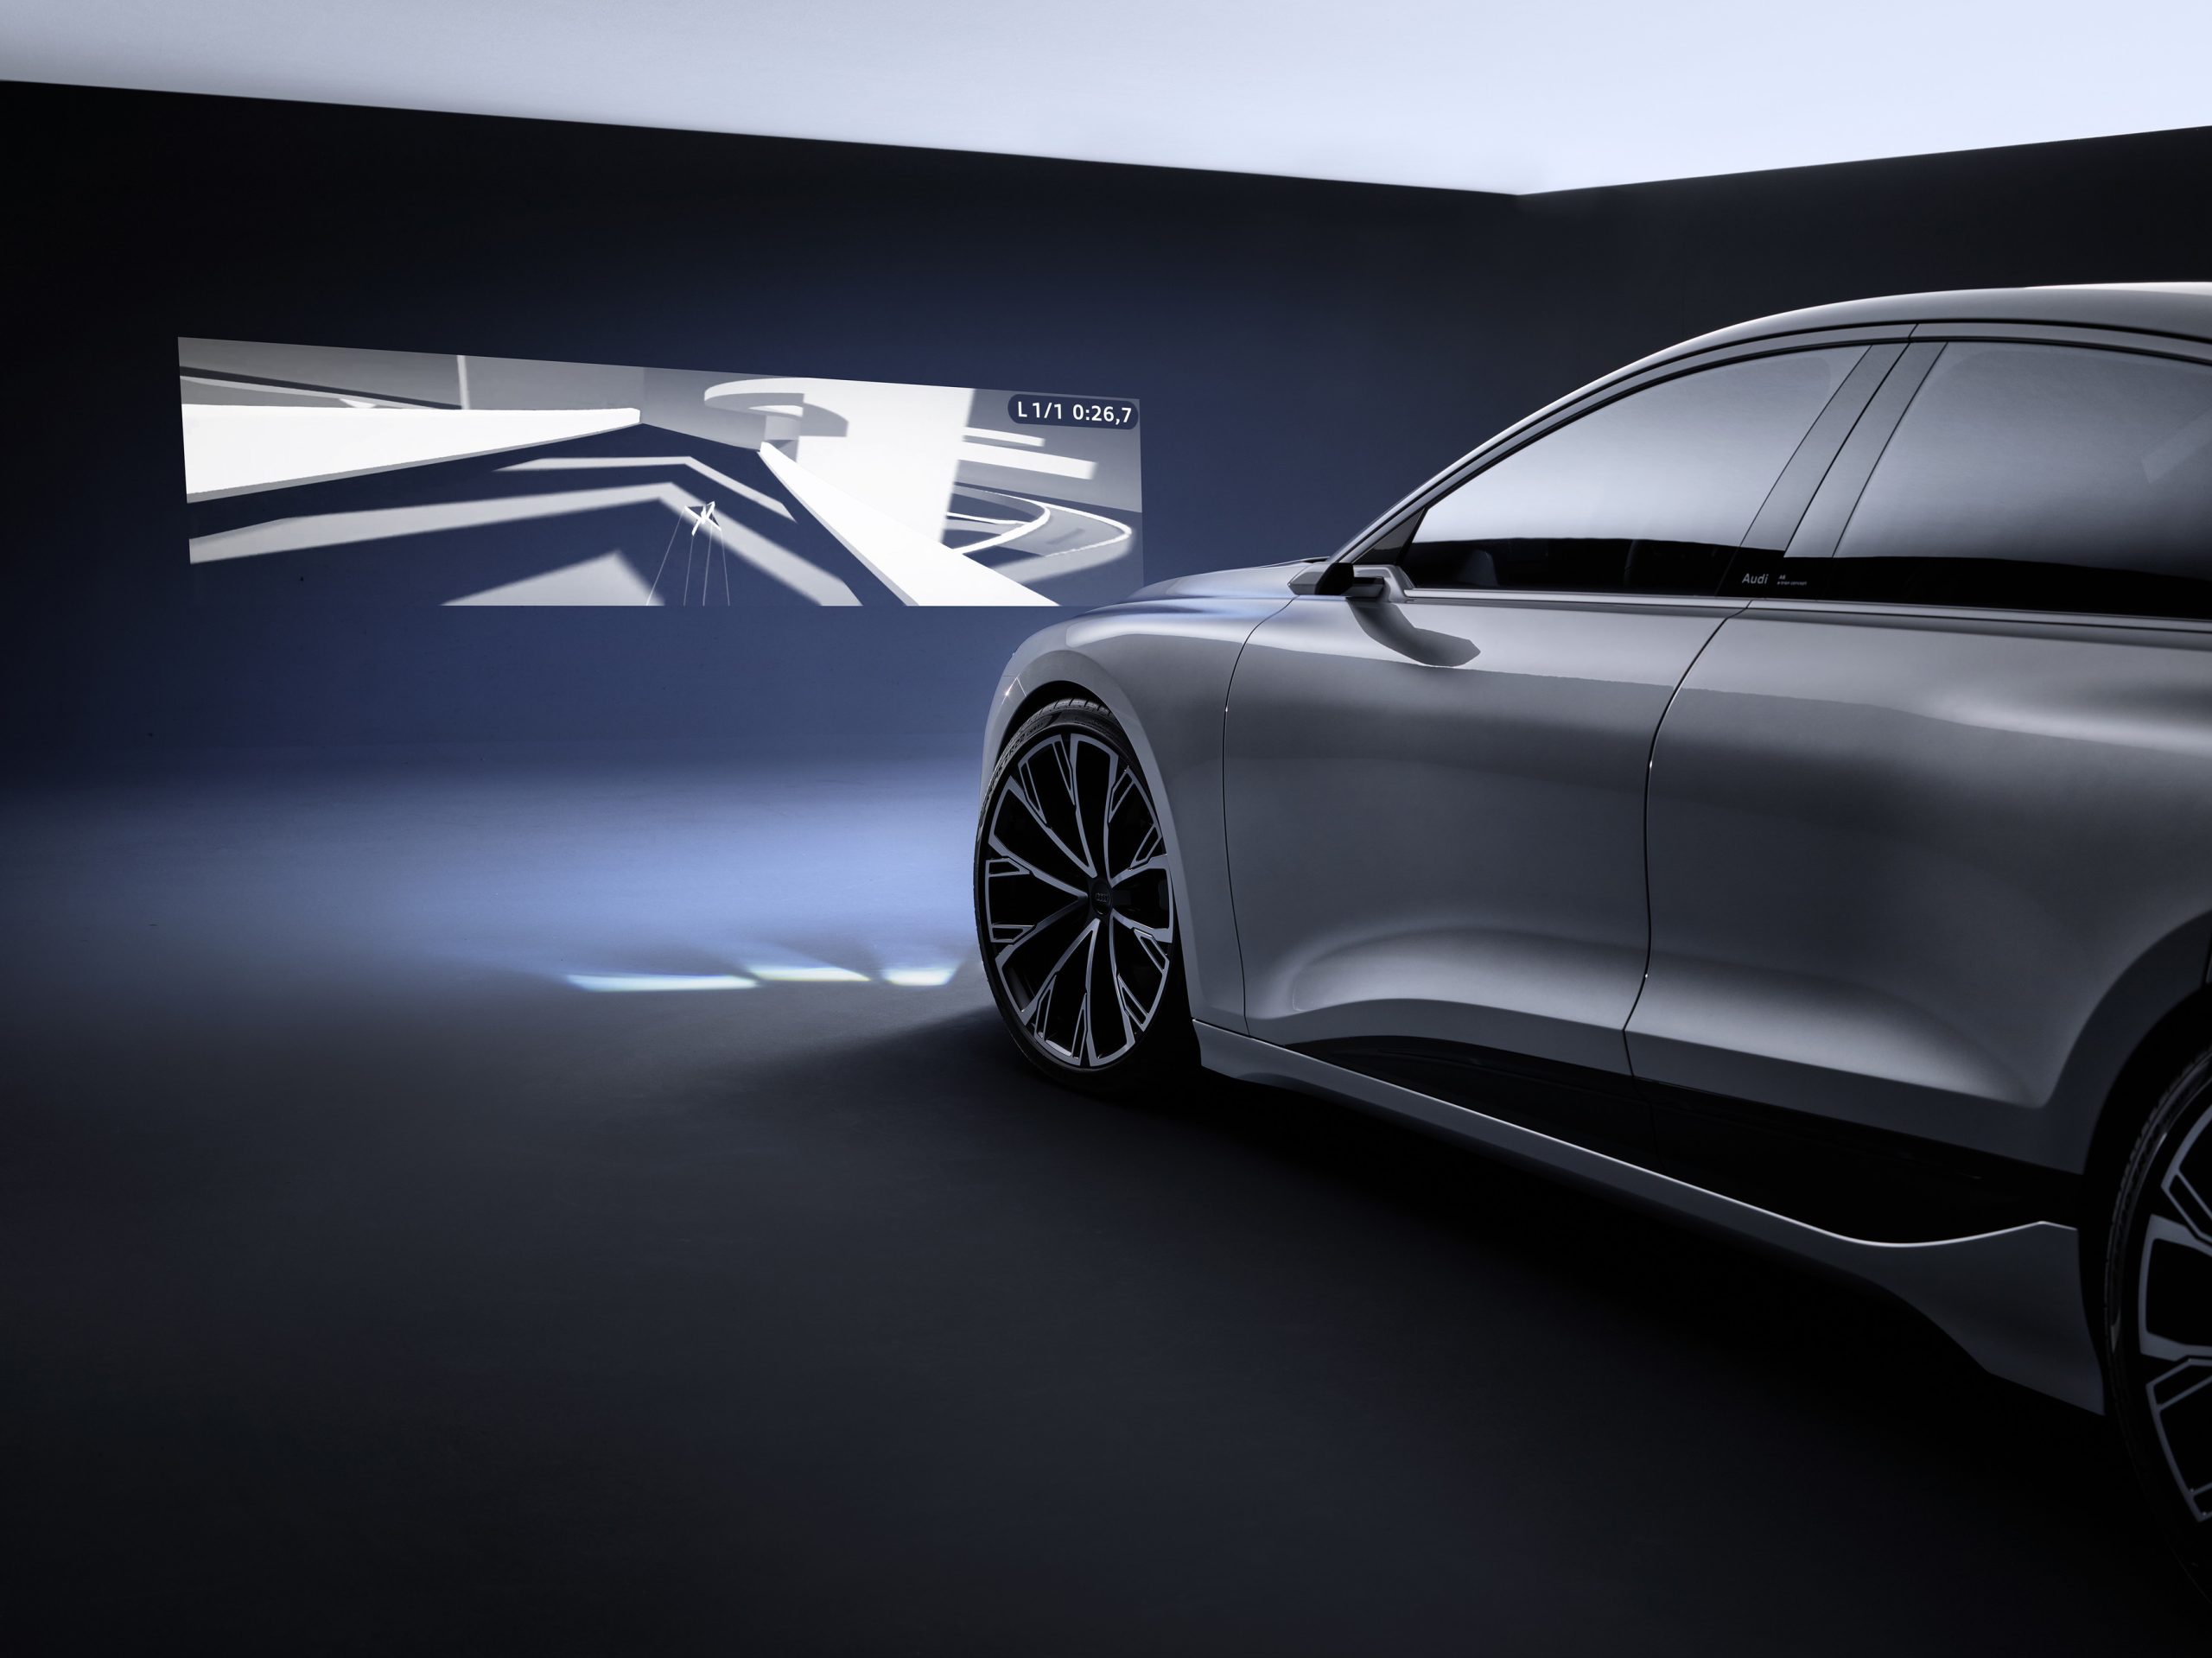 Audi’s A6 e-tron concept lets you play a racing game while your car charges